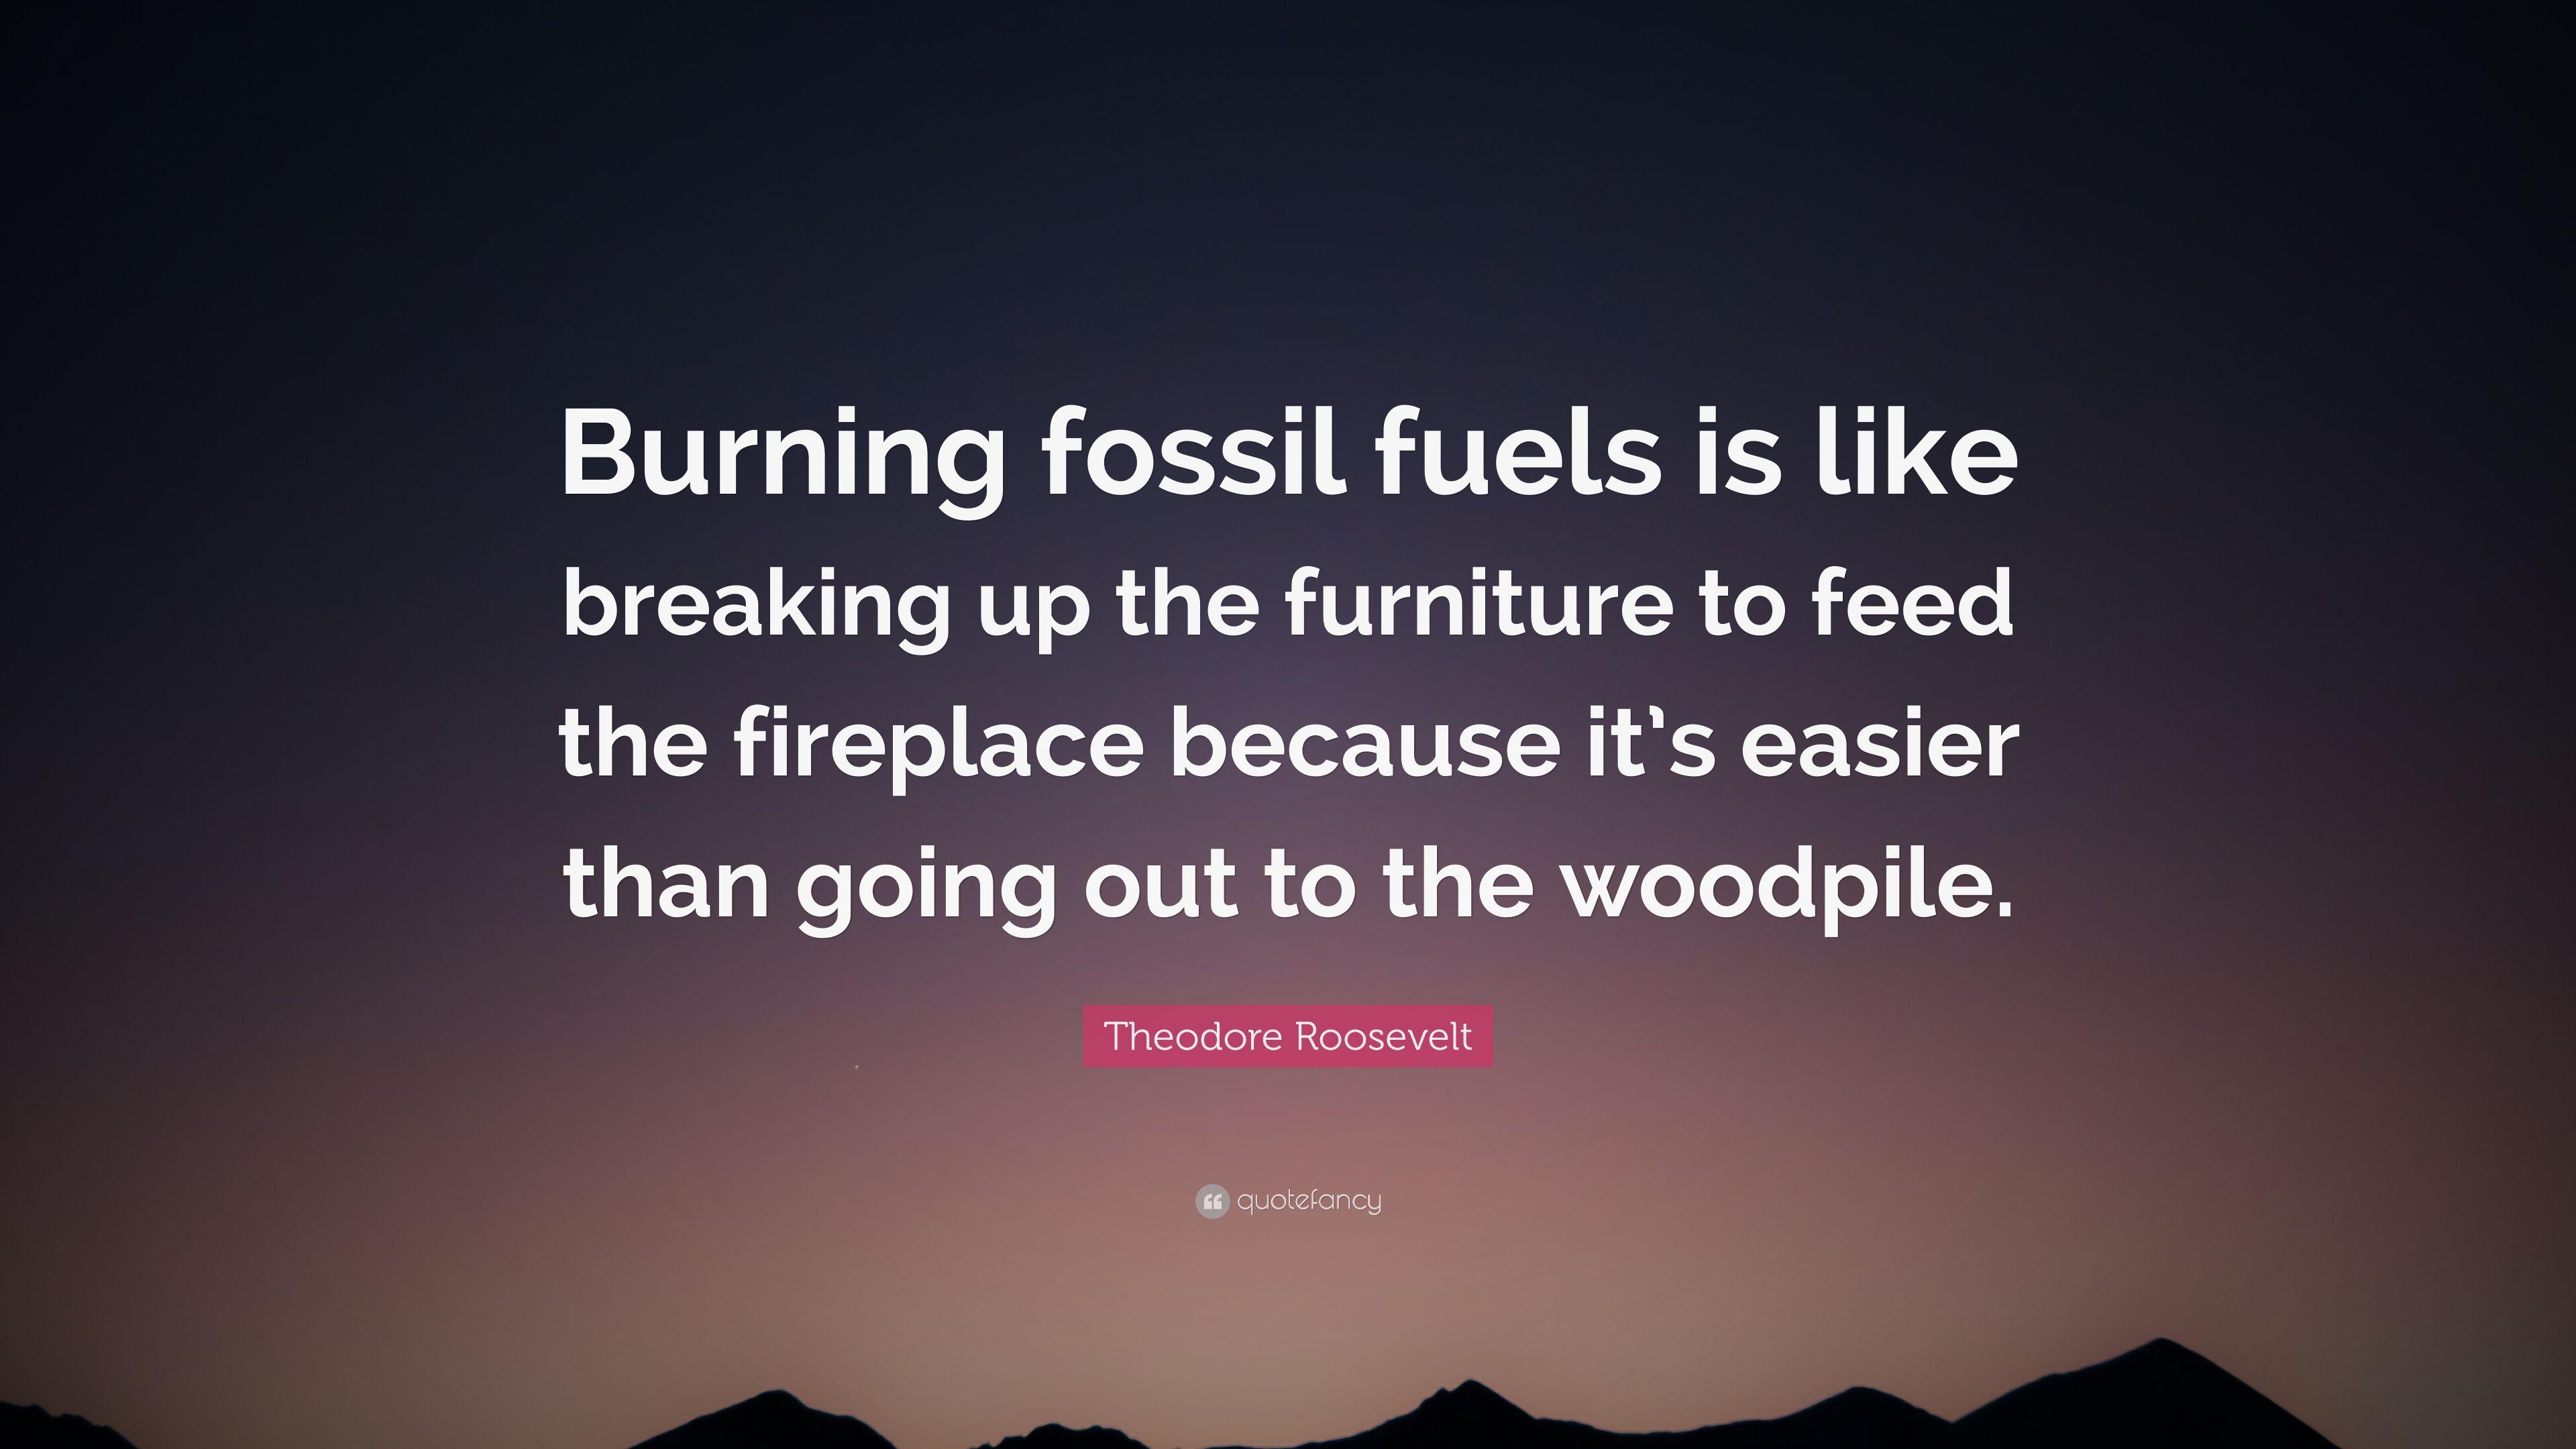 Theodore Roosevelt Quote: “Burning fossil fuels is like breaking up